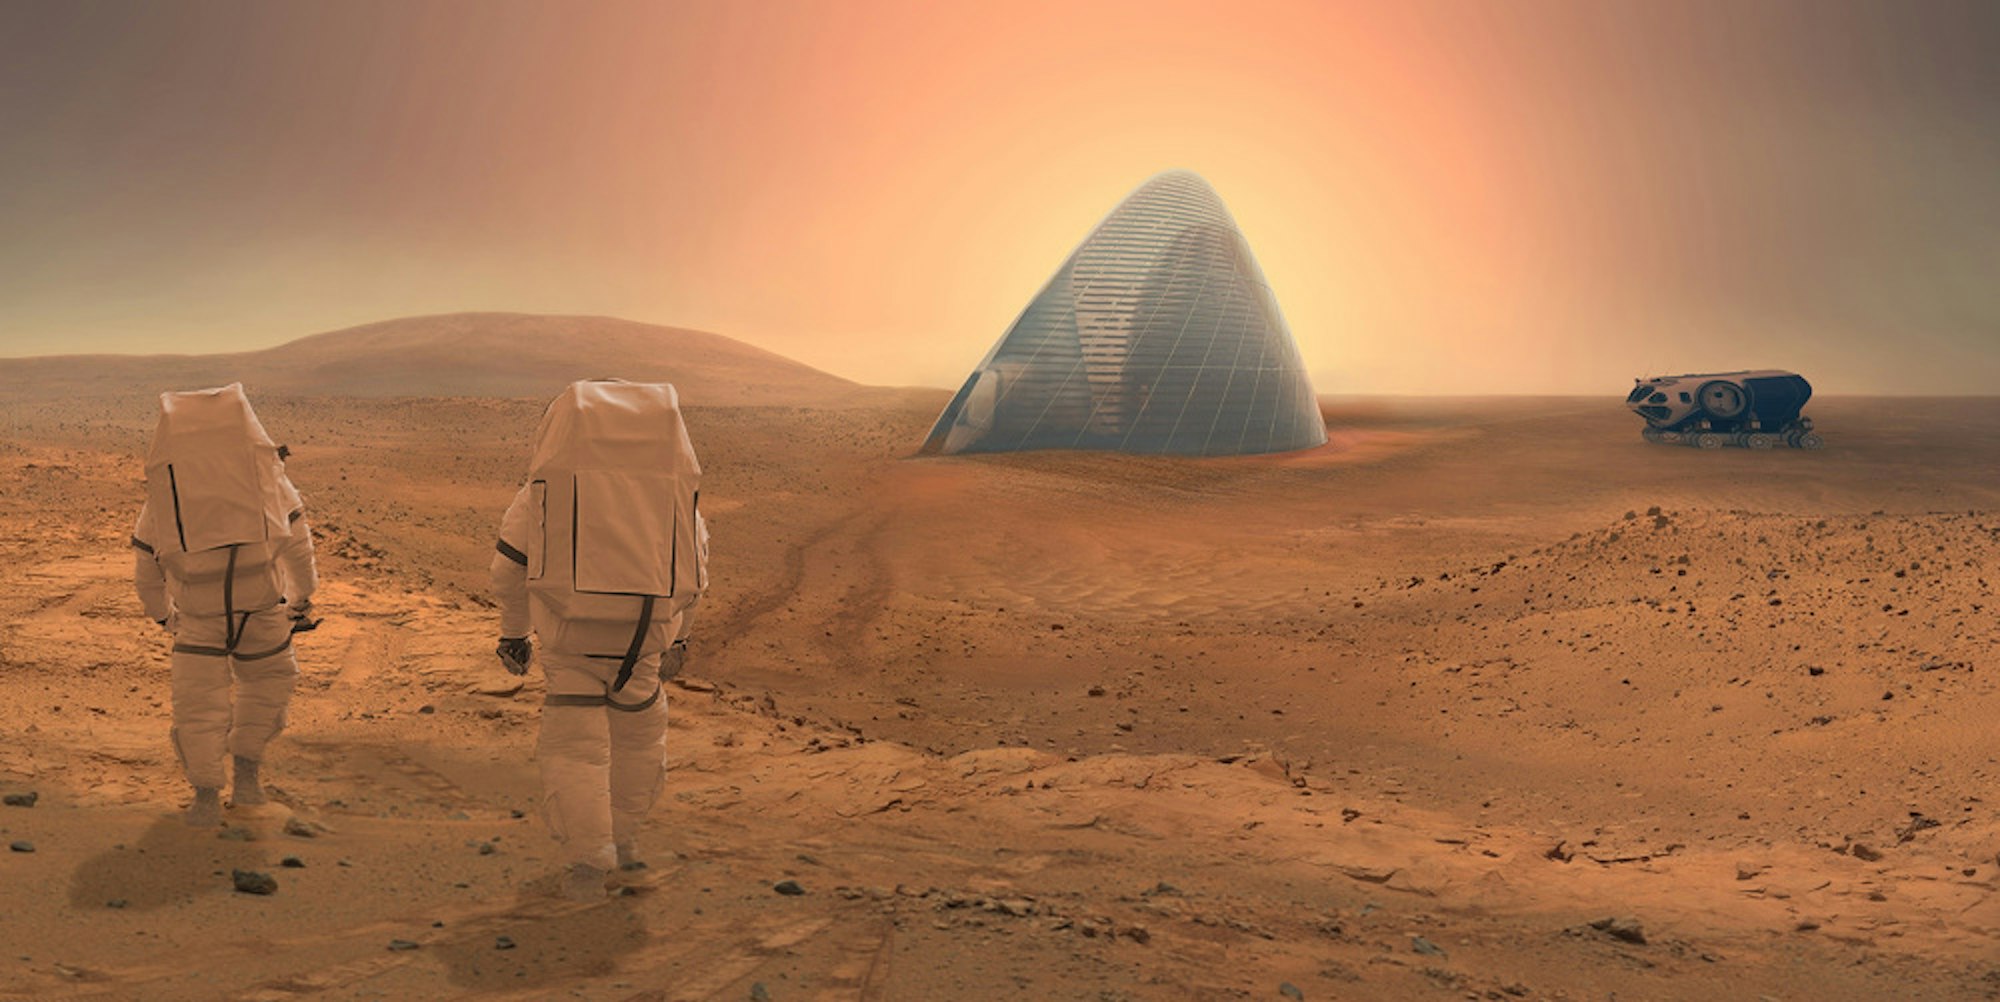 Future astronauts could live in modified igloos on Mars.